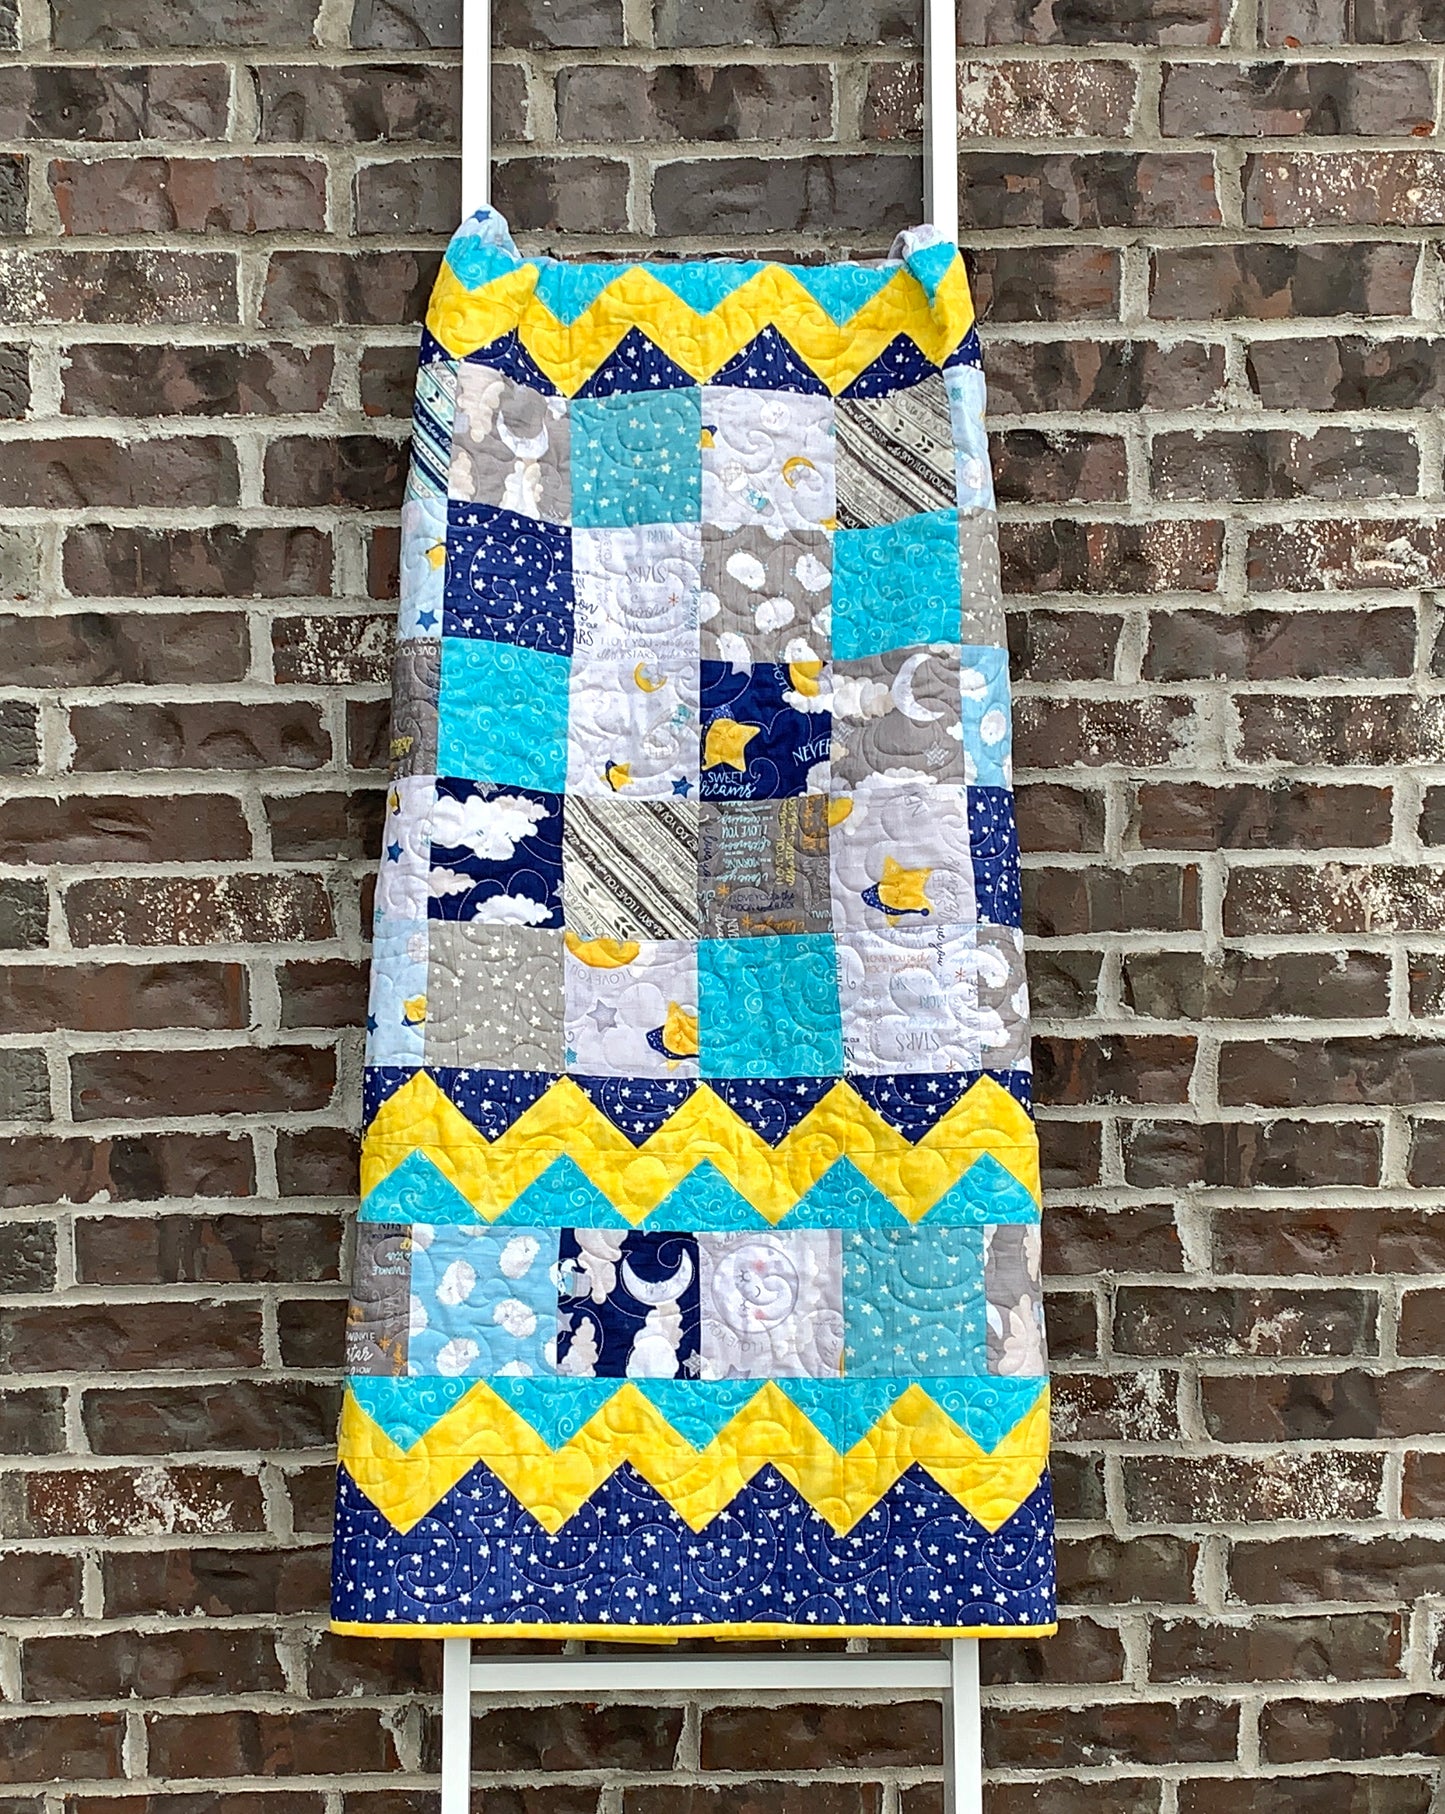 Blue, yellow, teal and gray patchwork baby or toddler quilt with four zig-zag rows accenting the patchwork blocks. Quilt is shown displayed on a ladder.